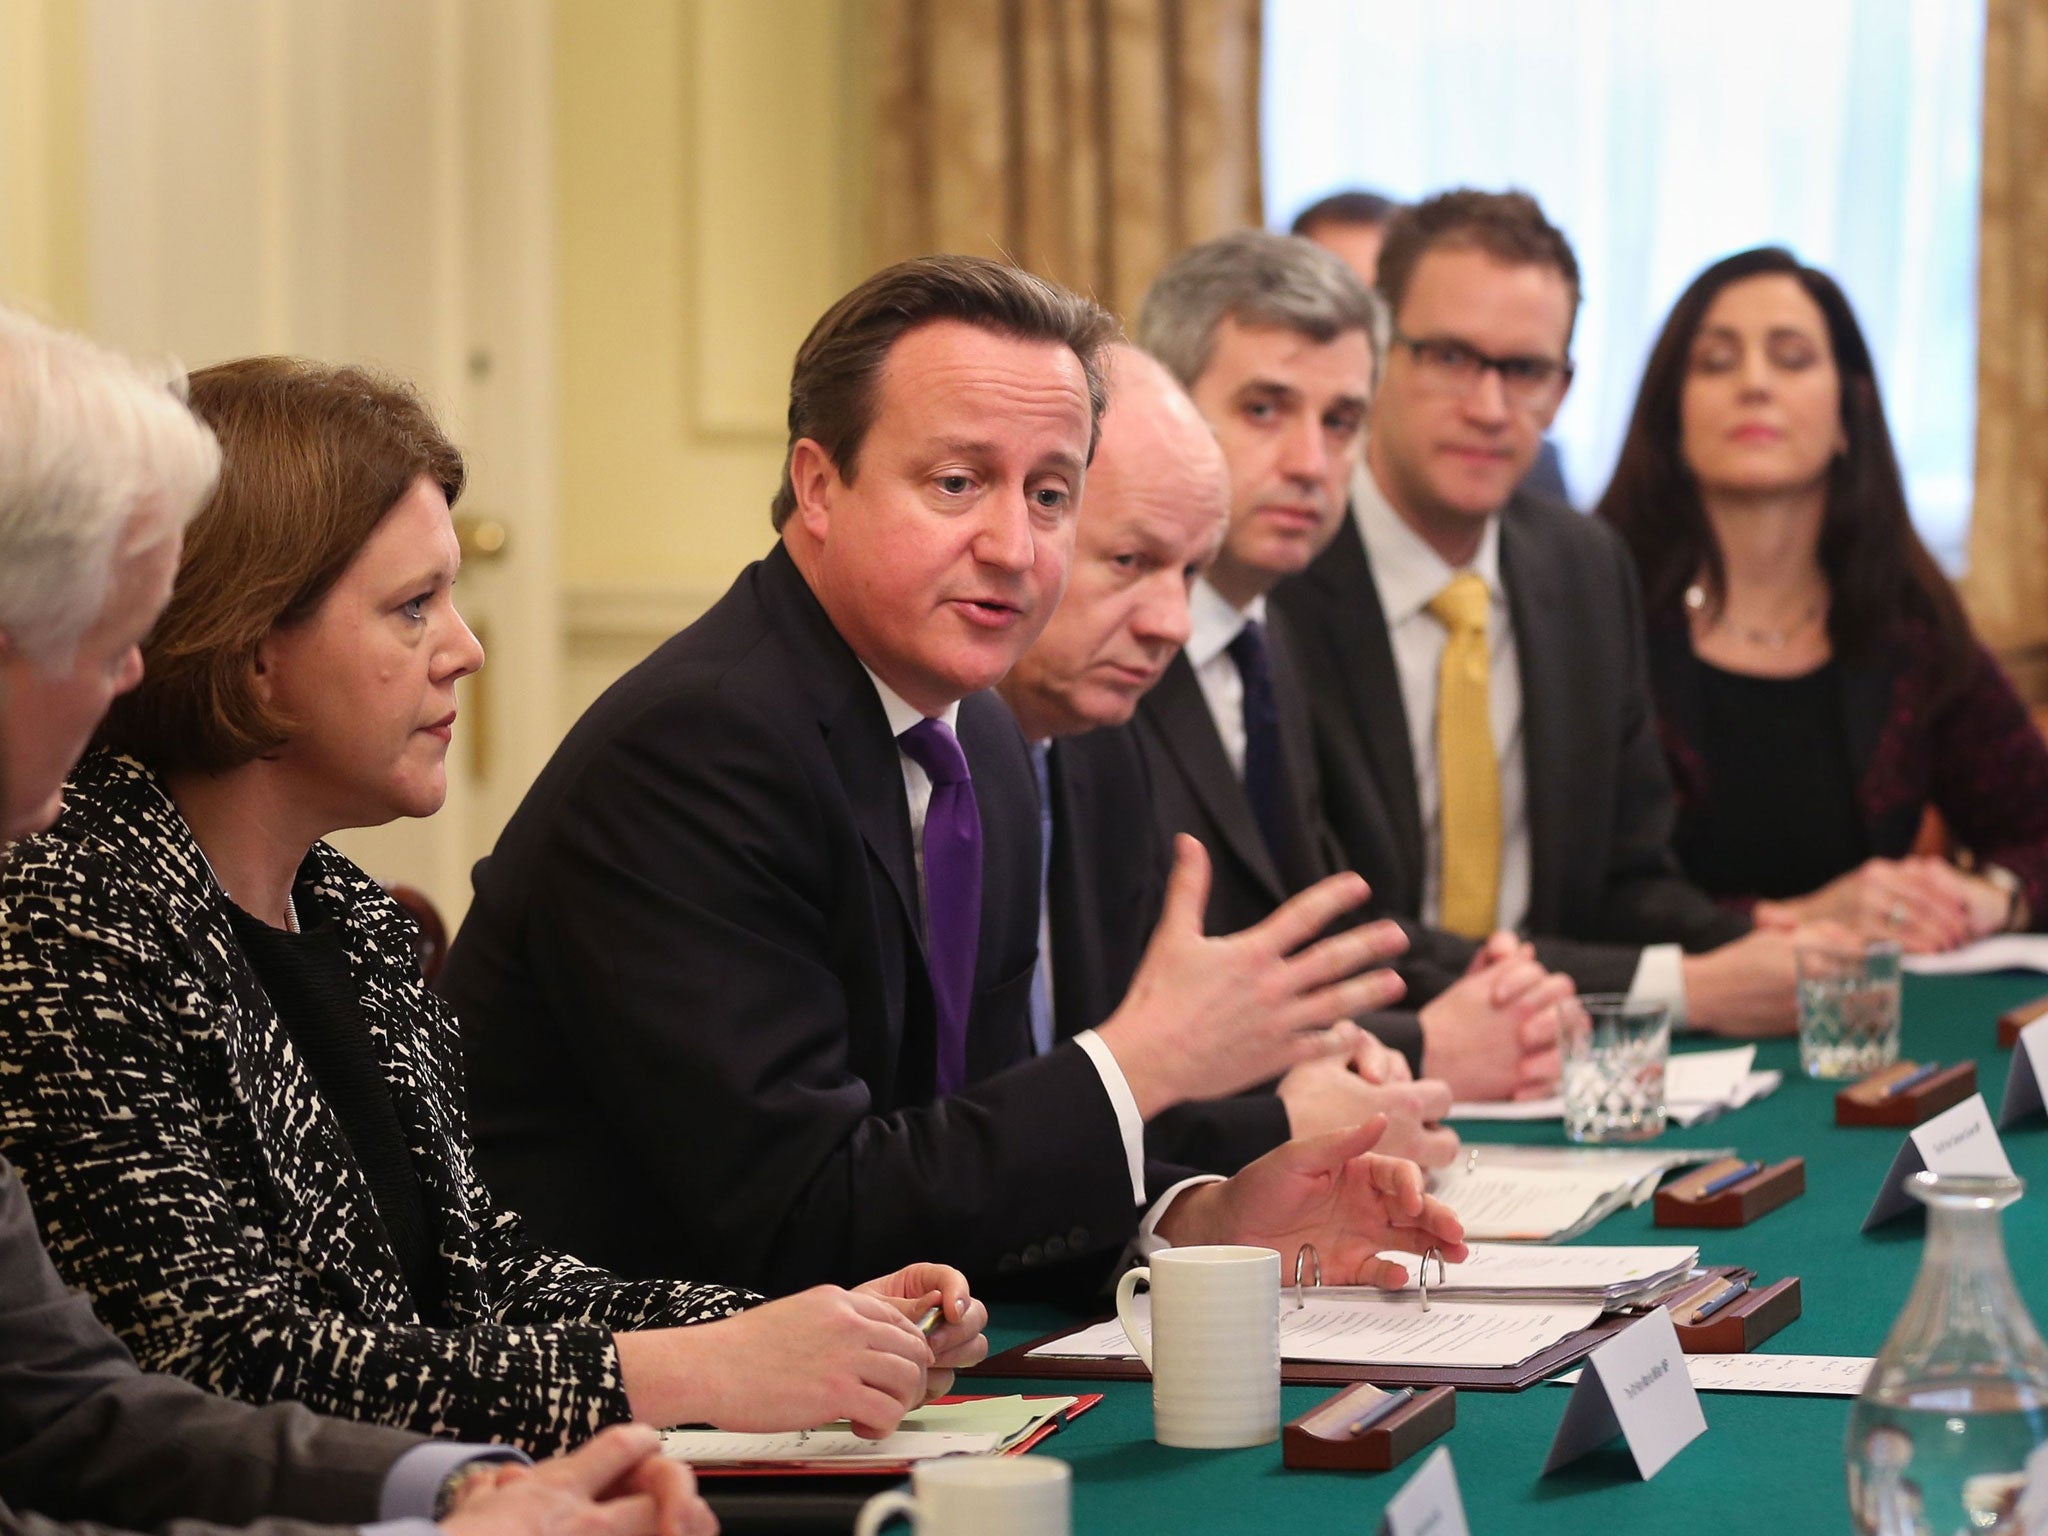 David Cameron speaking at a child abuse summit at Downing Street in 2013